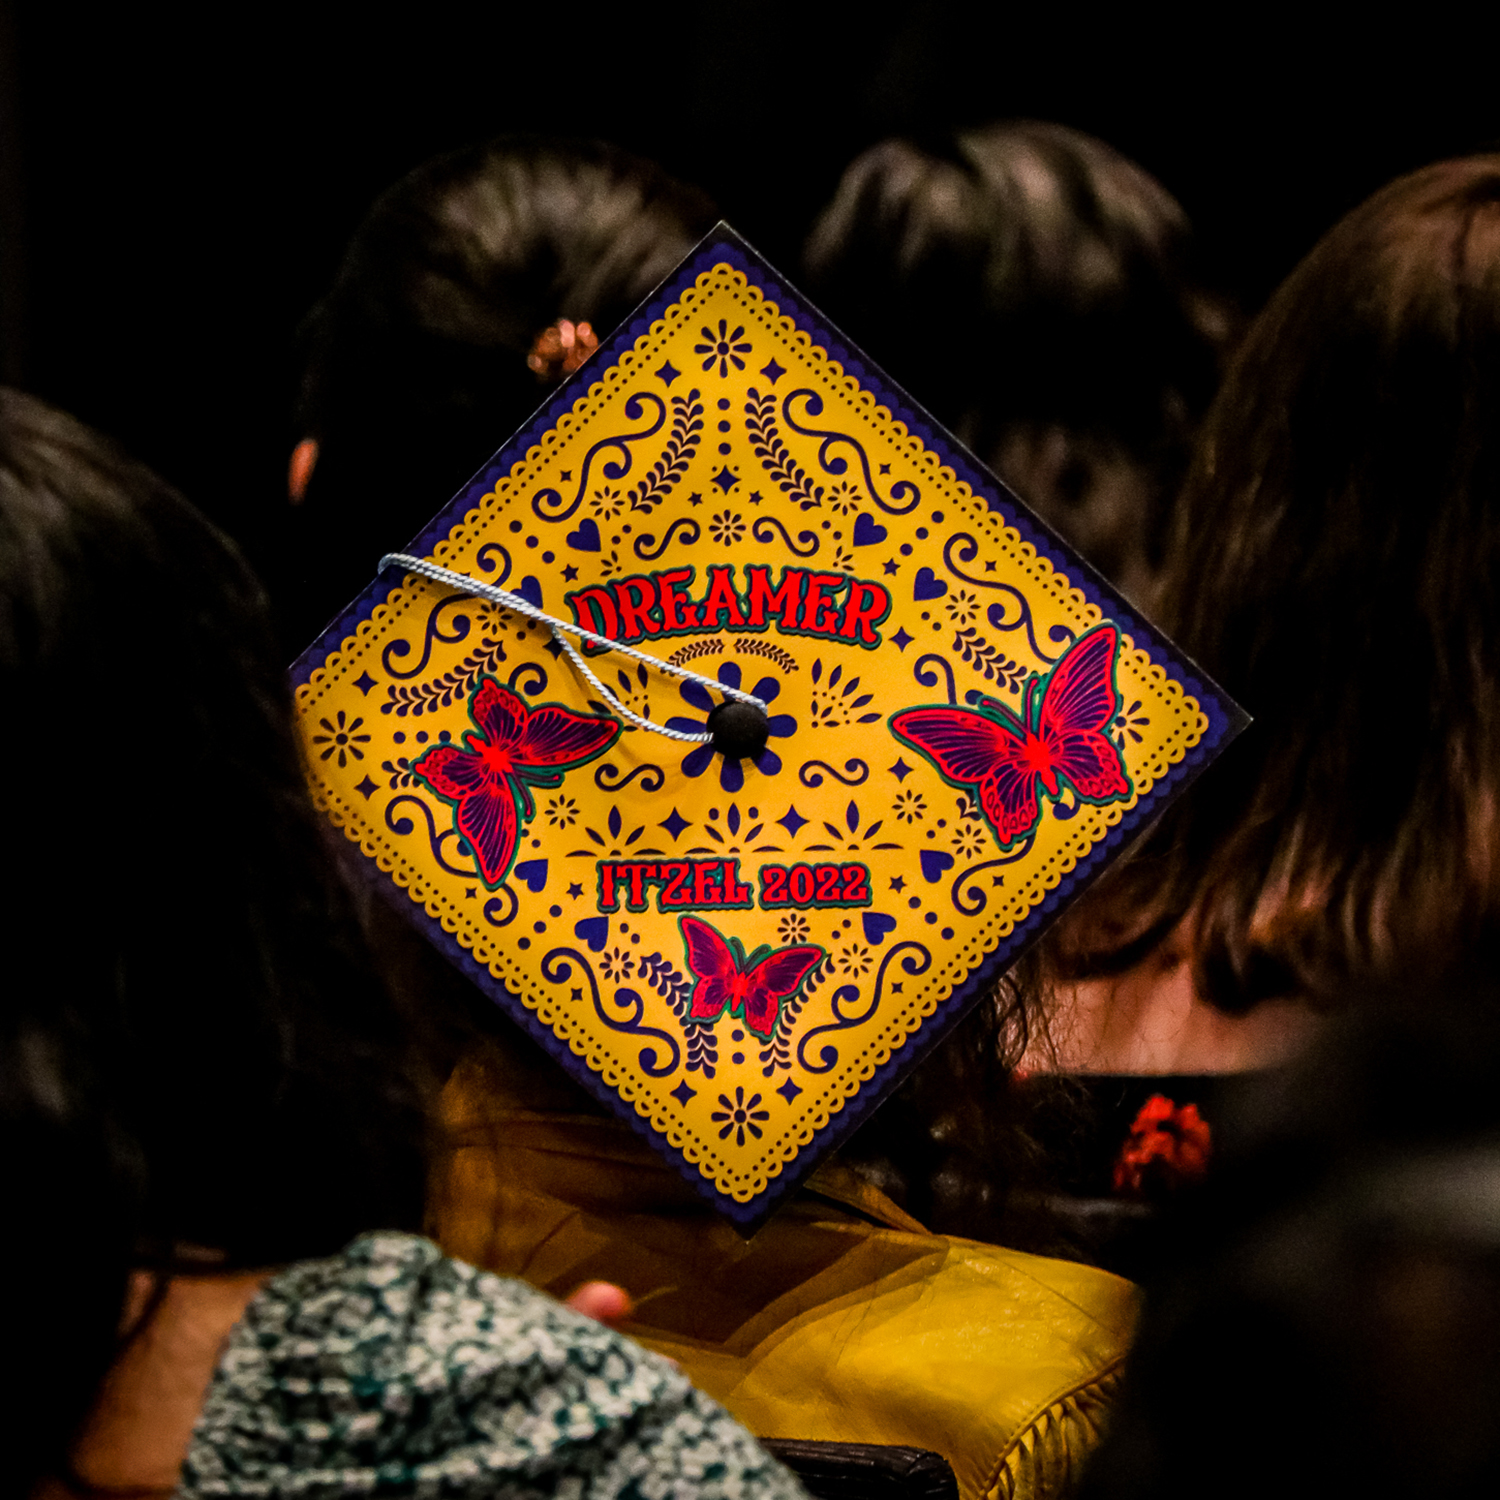 A student showing off their decorated graduation cap at the Undocu-Graduation ceremony on Saturday, May 7, 2022, in Northridge, Calif.